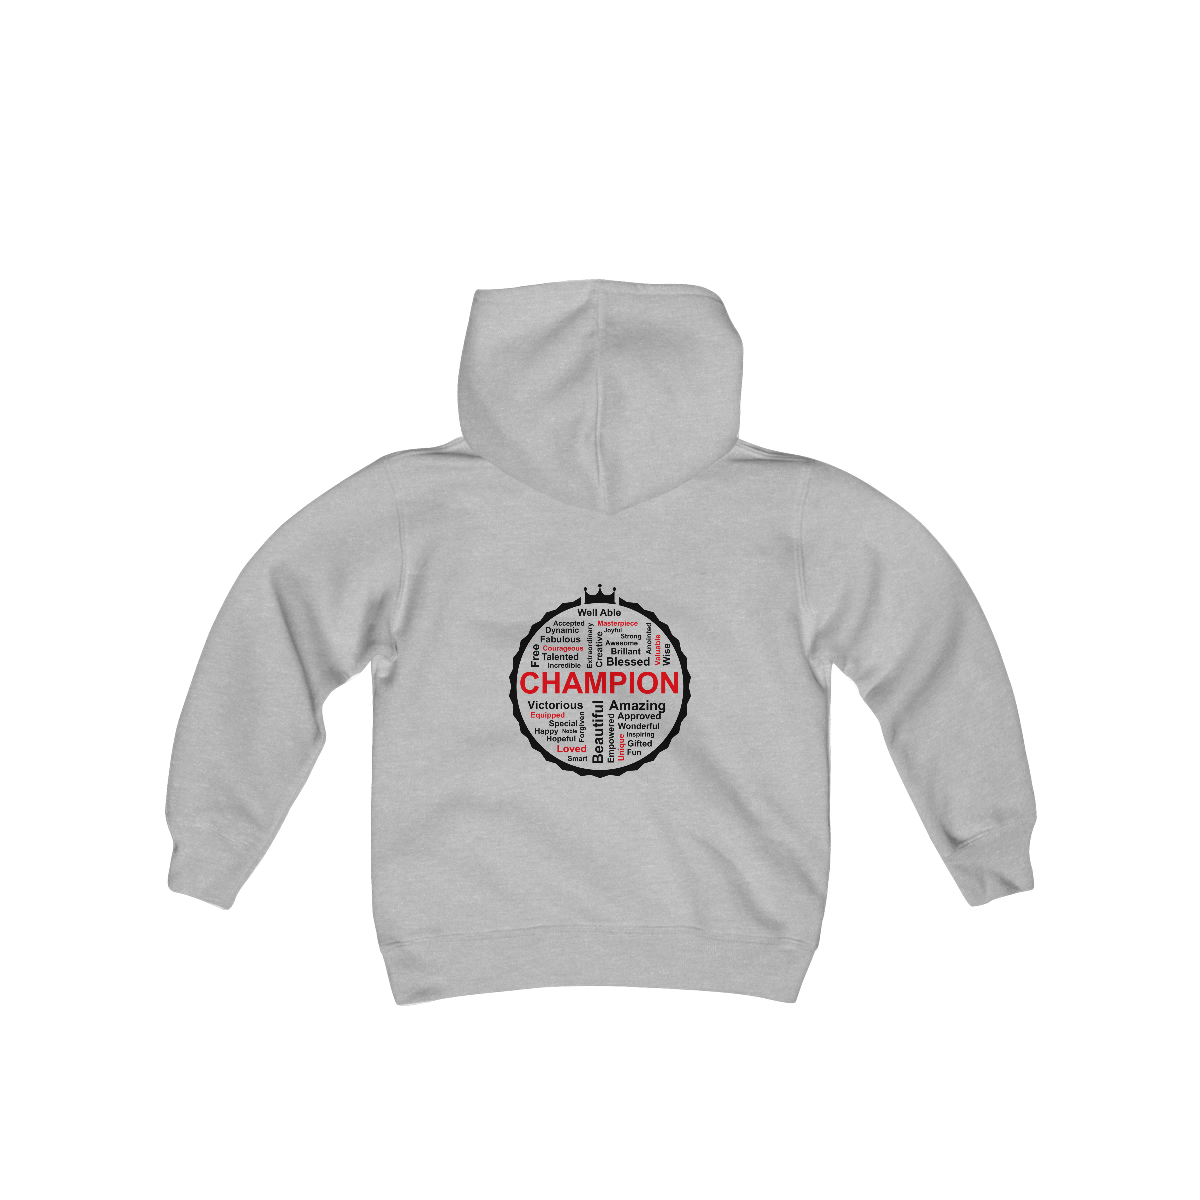 CHAMPION Kids Hoodie - Champions Ministry Needs Club Special